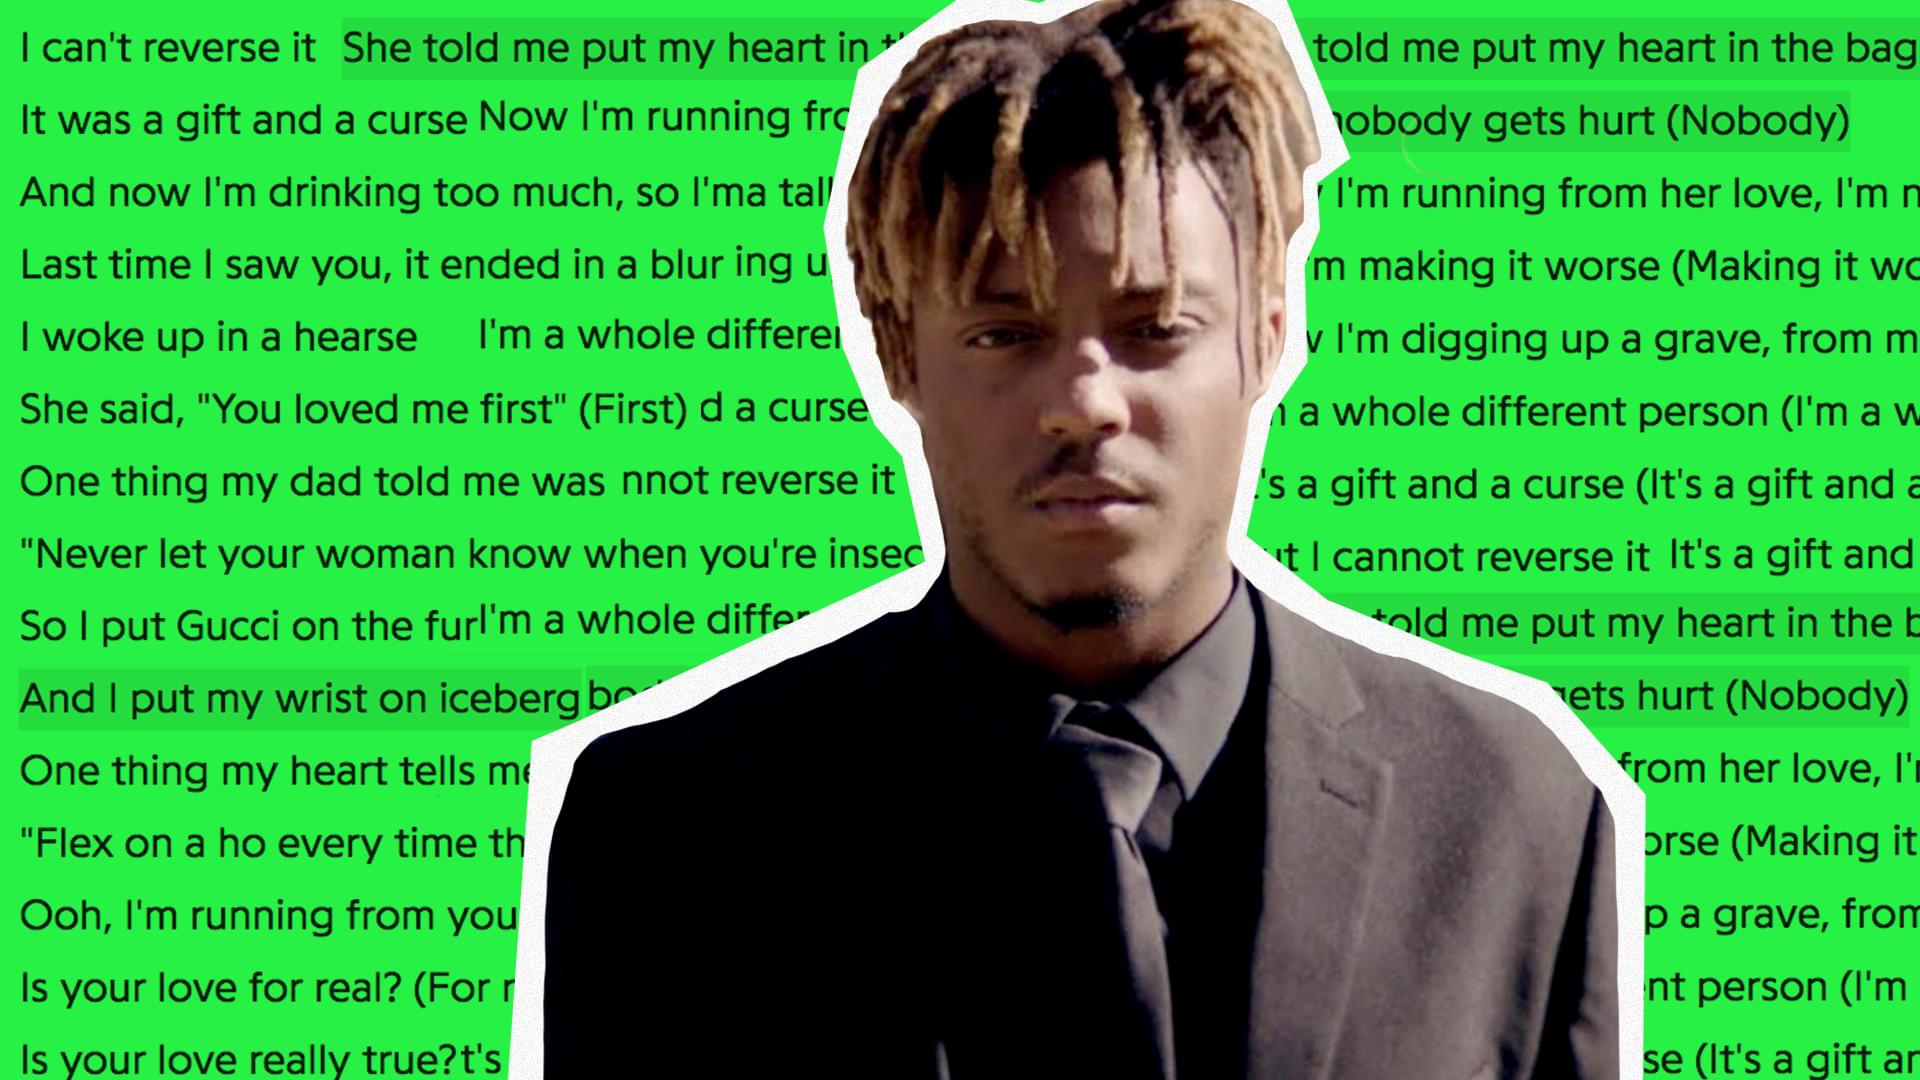 Juice WRLD Previews His New Album 'A Deathrace For Love' With